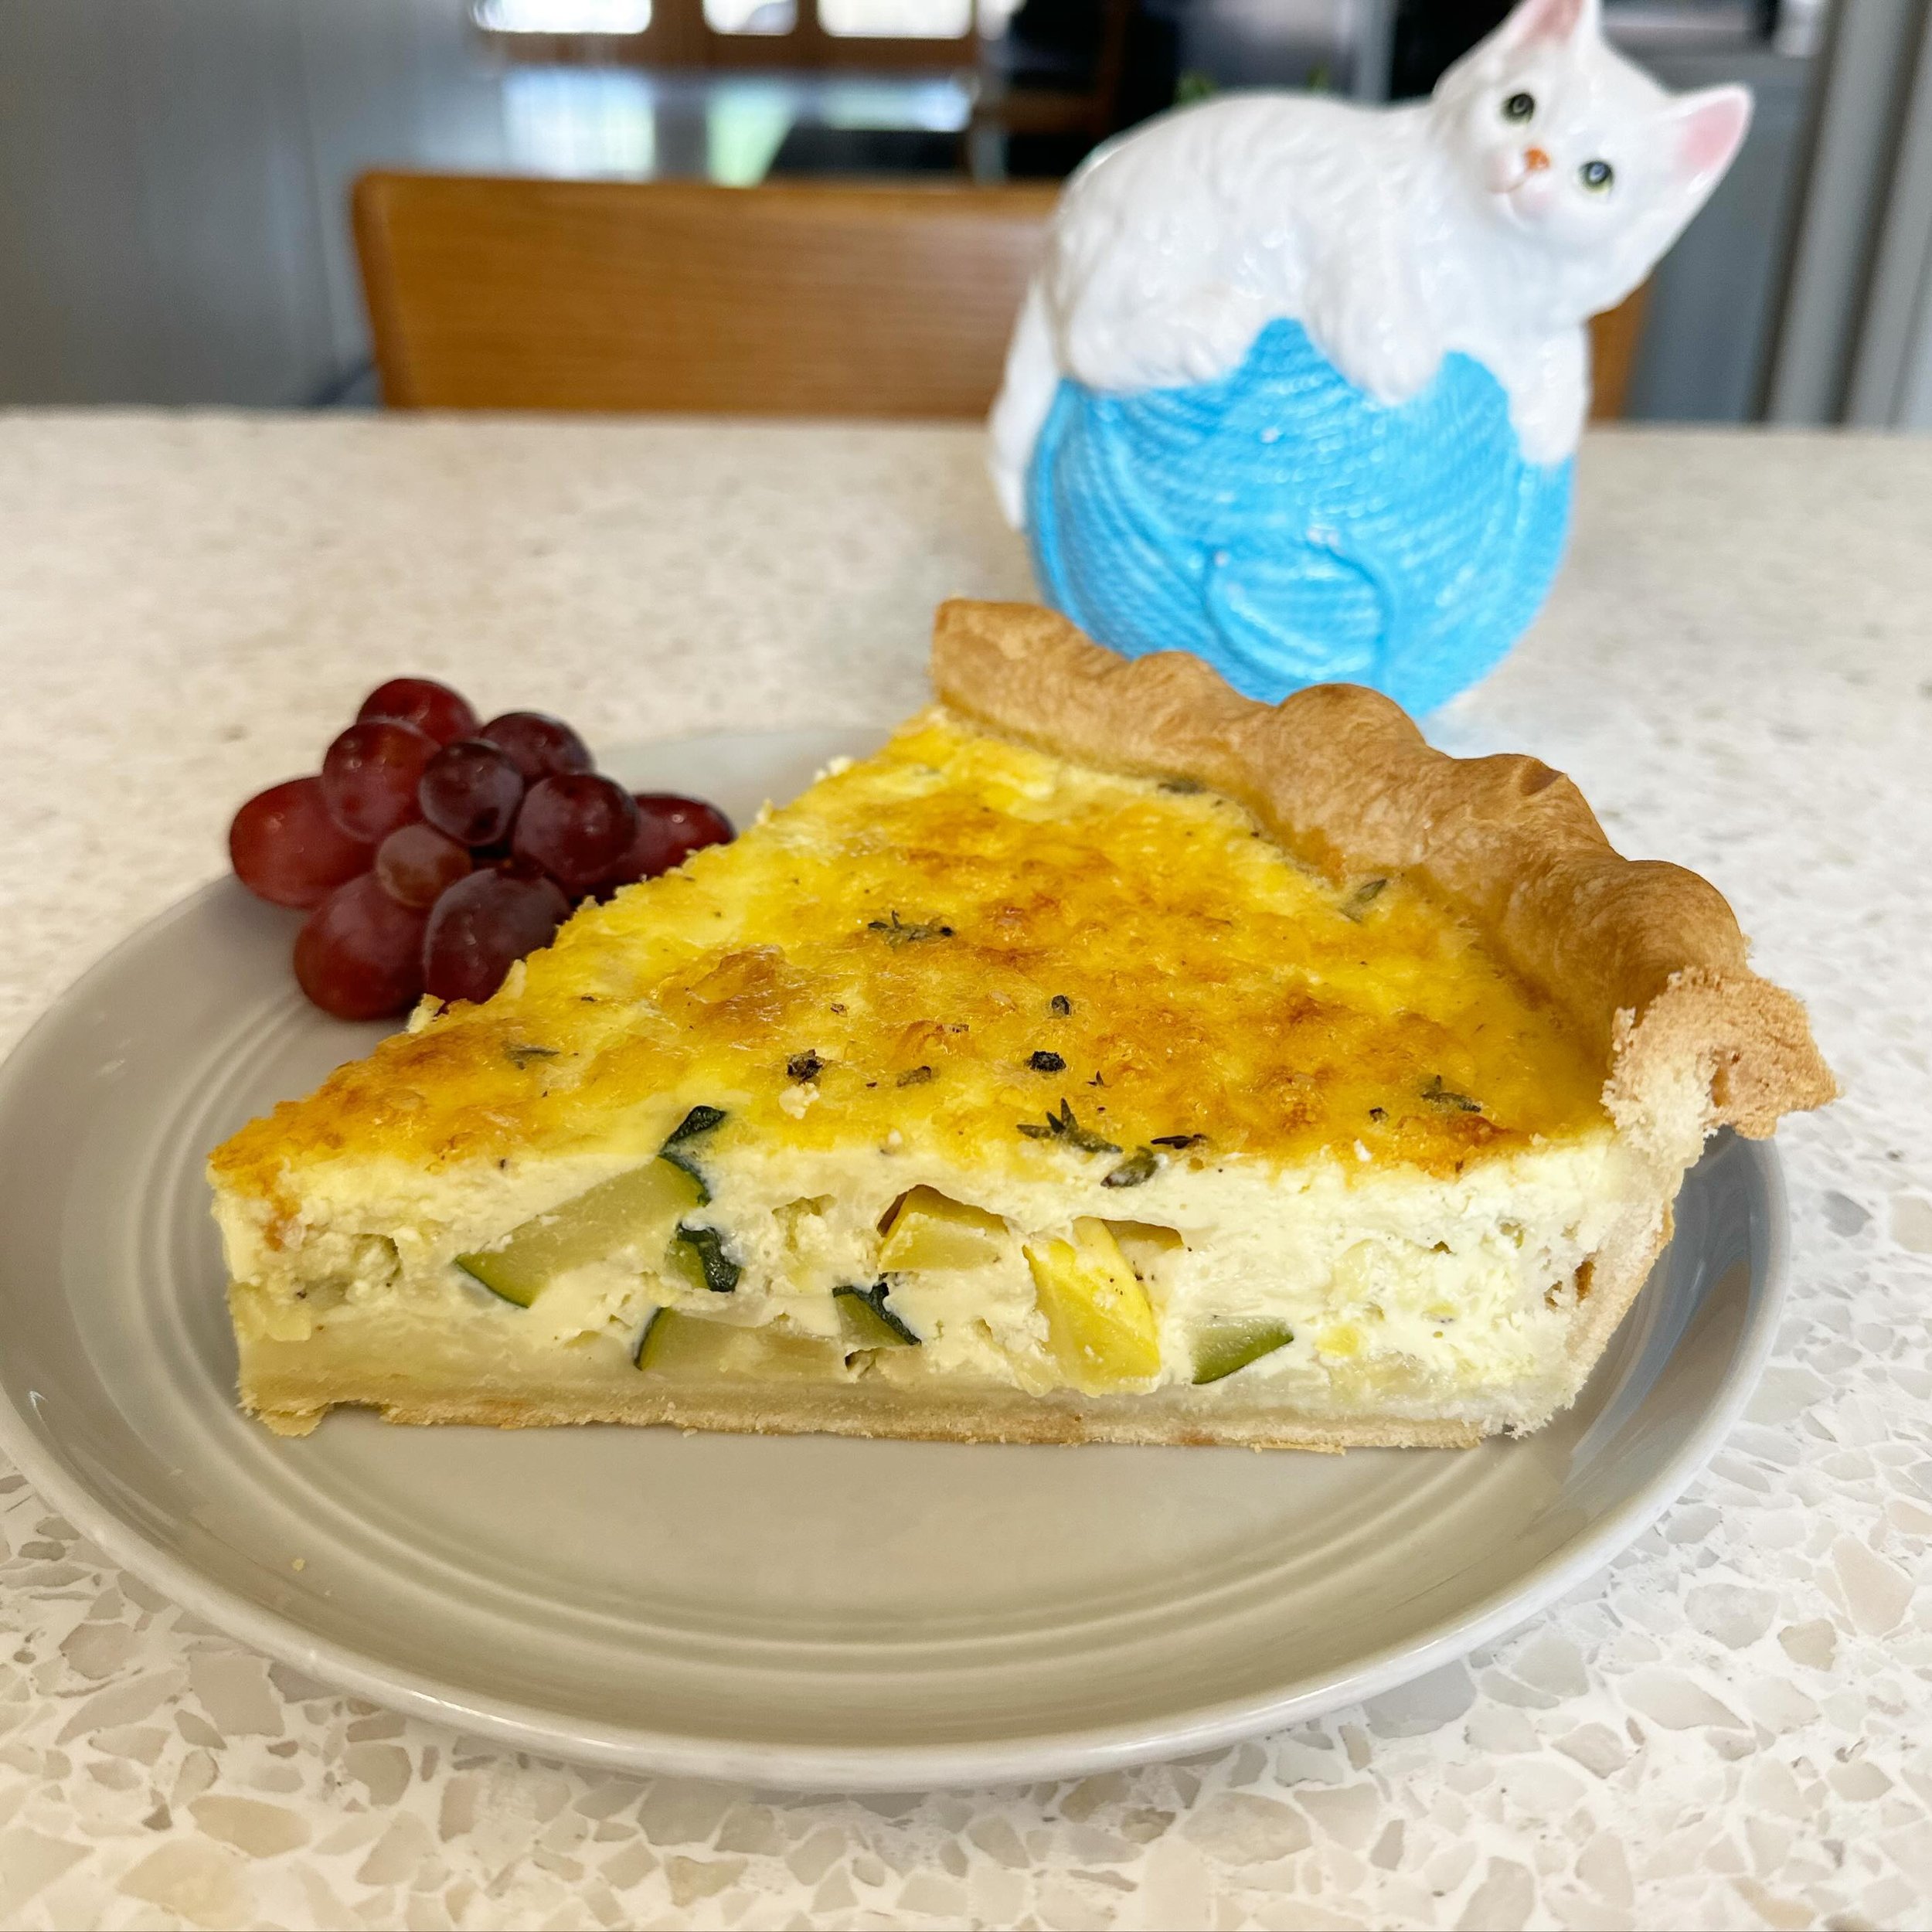 Quiche of the day is summer squash with sharp cheddar and thyme. 🥧☕️ #buckminsterscatcafe #catcafefood #lunchwithcats